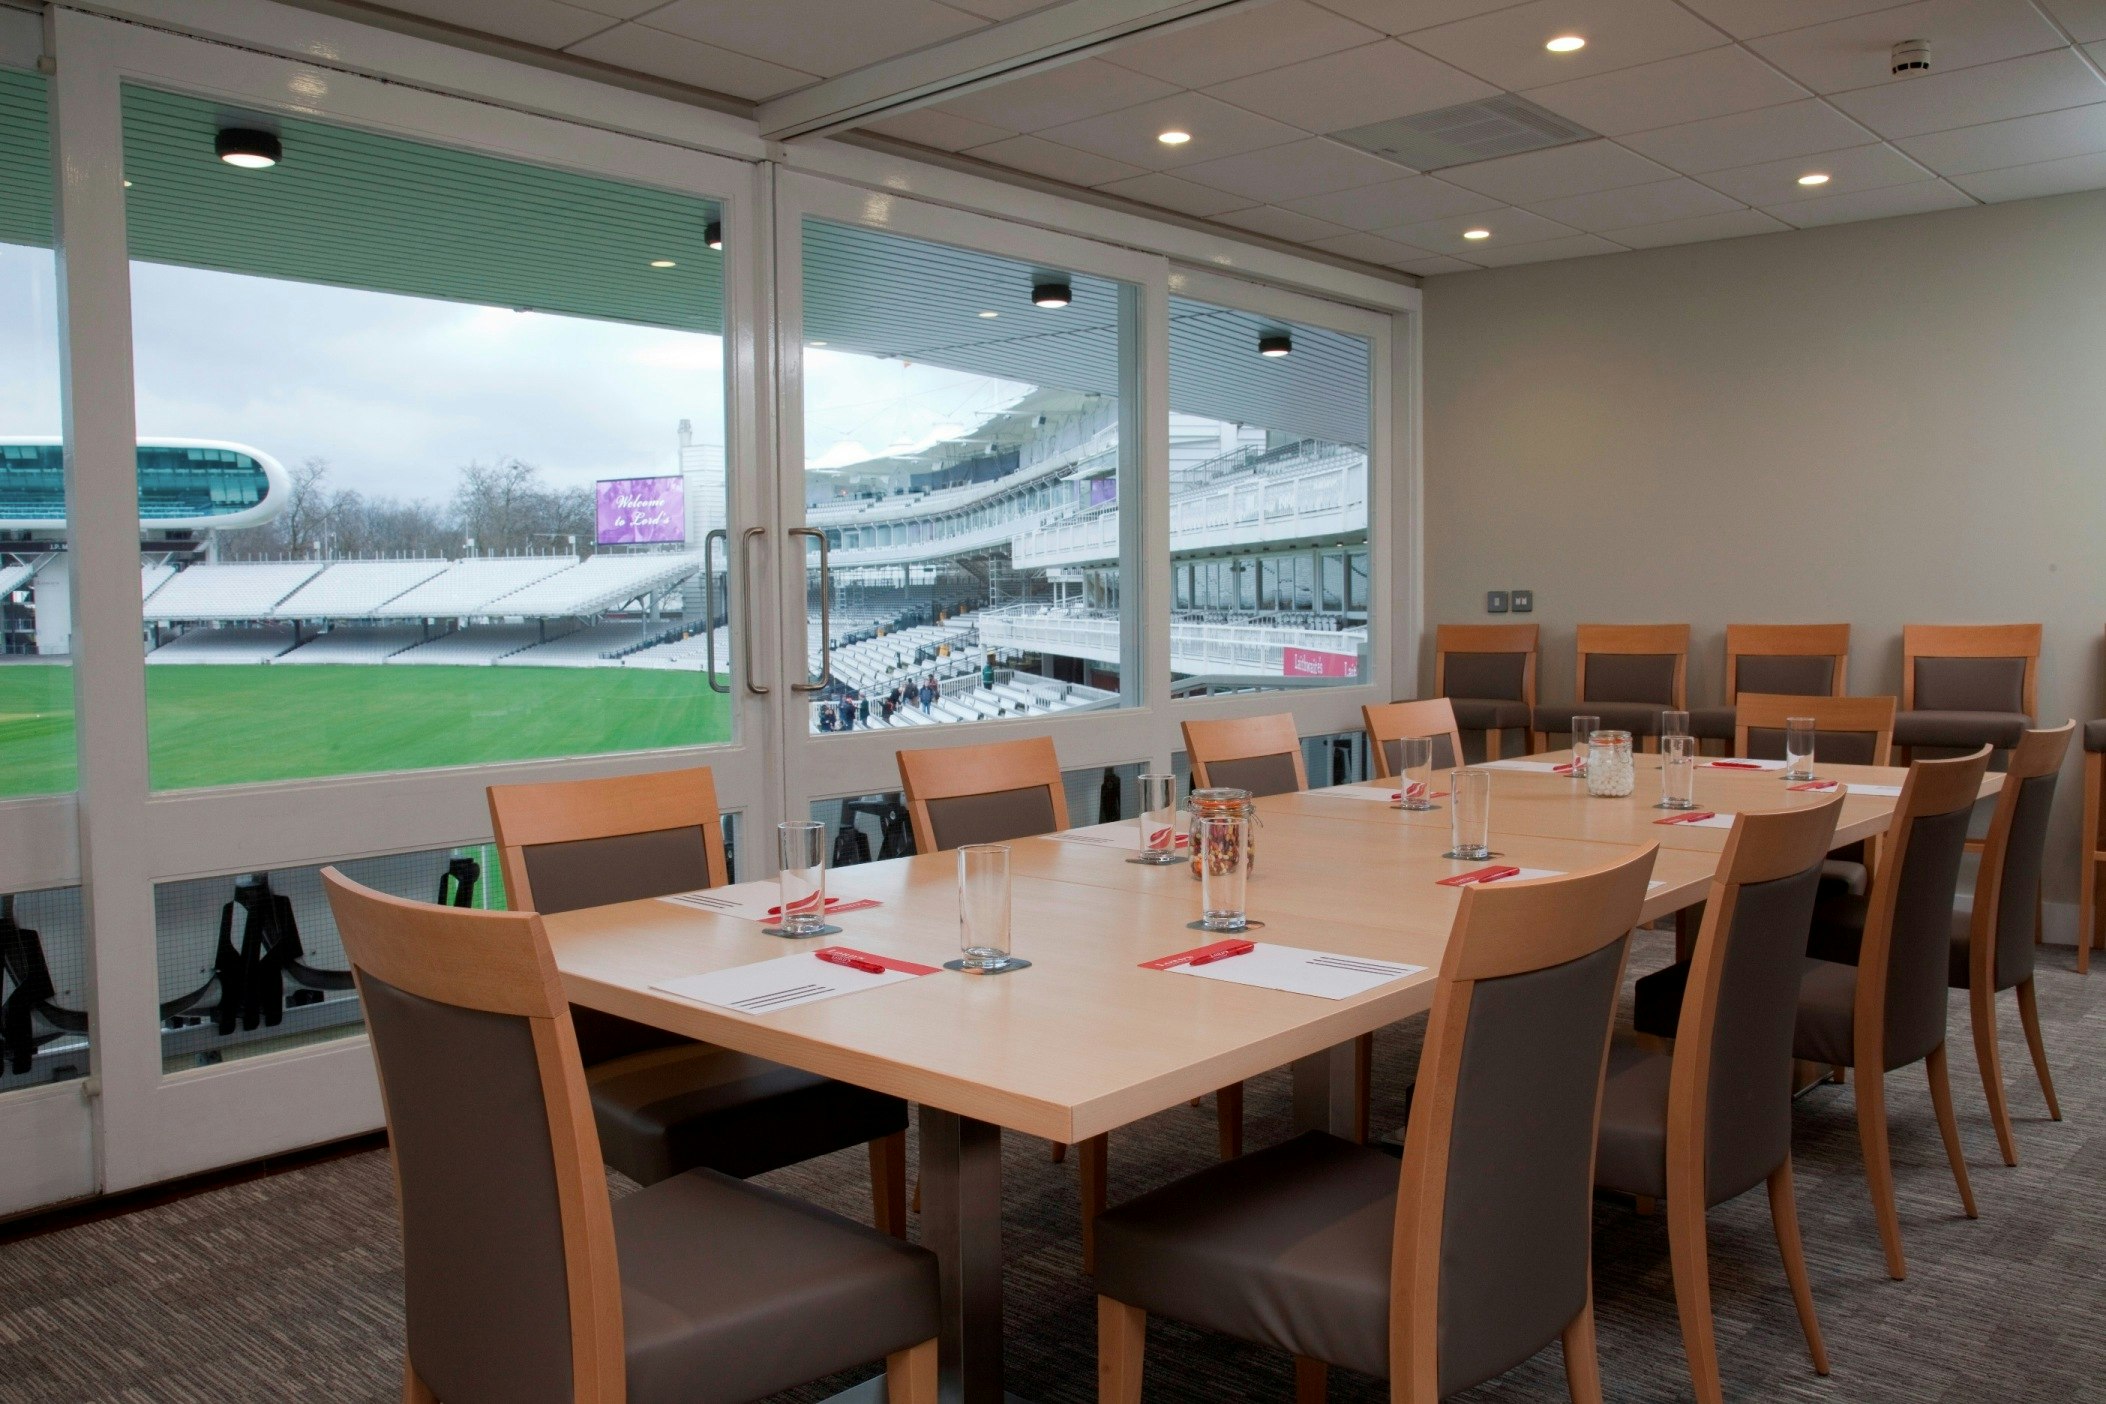 Meeting Rooms Venues in South London - Lord's Cricket Ground